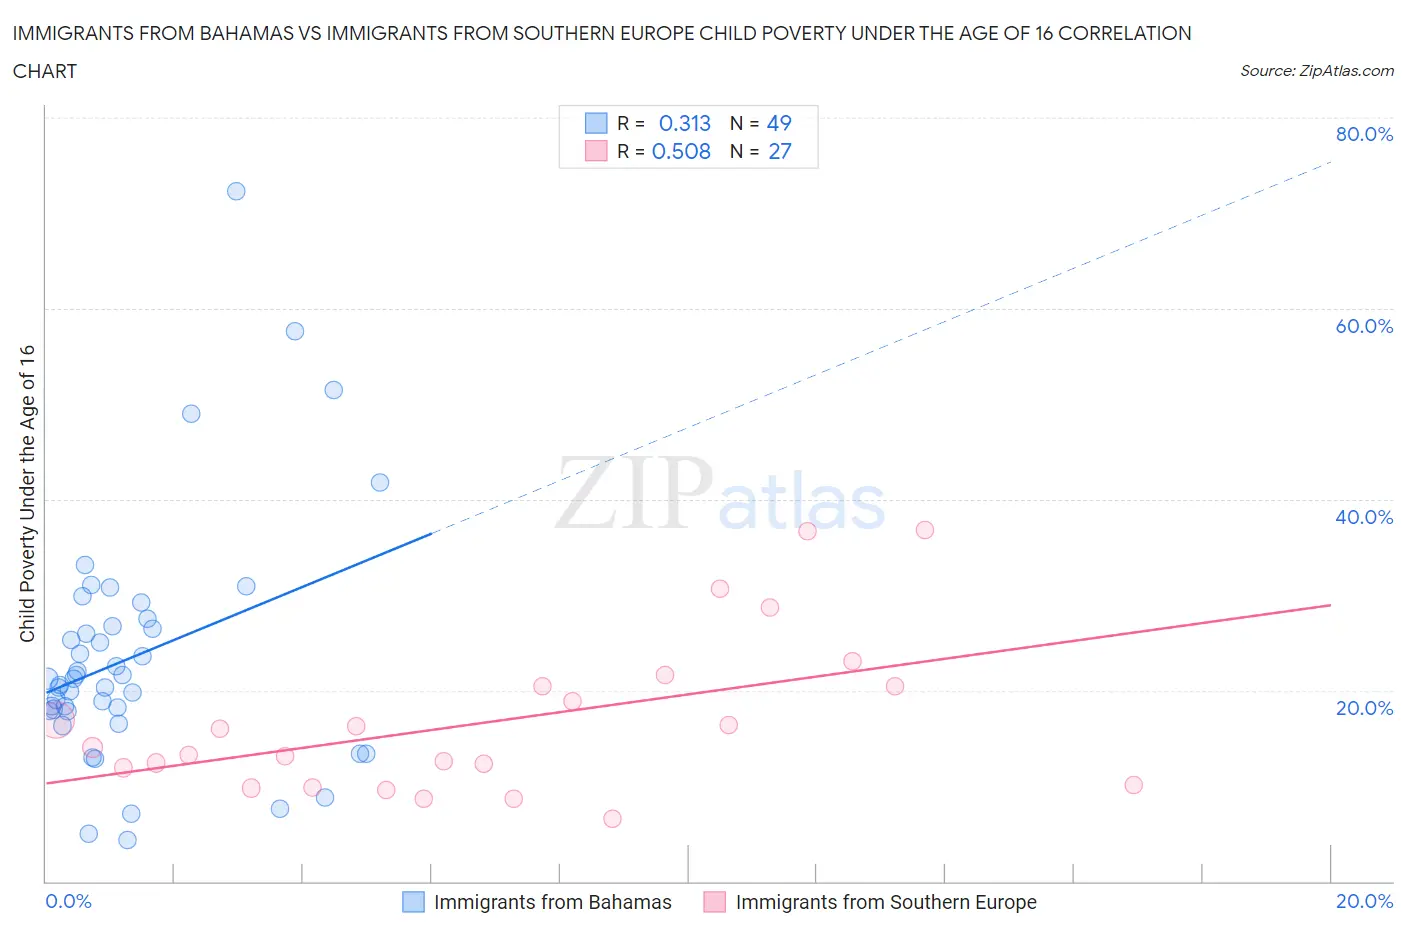 Immigrants from Bahamas vs Immigrants from Southern Europe Child Poverty Under the Age of 16